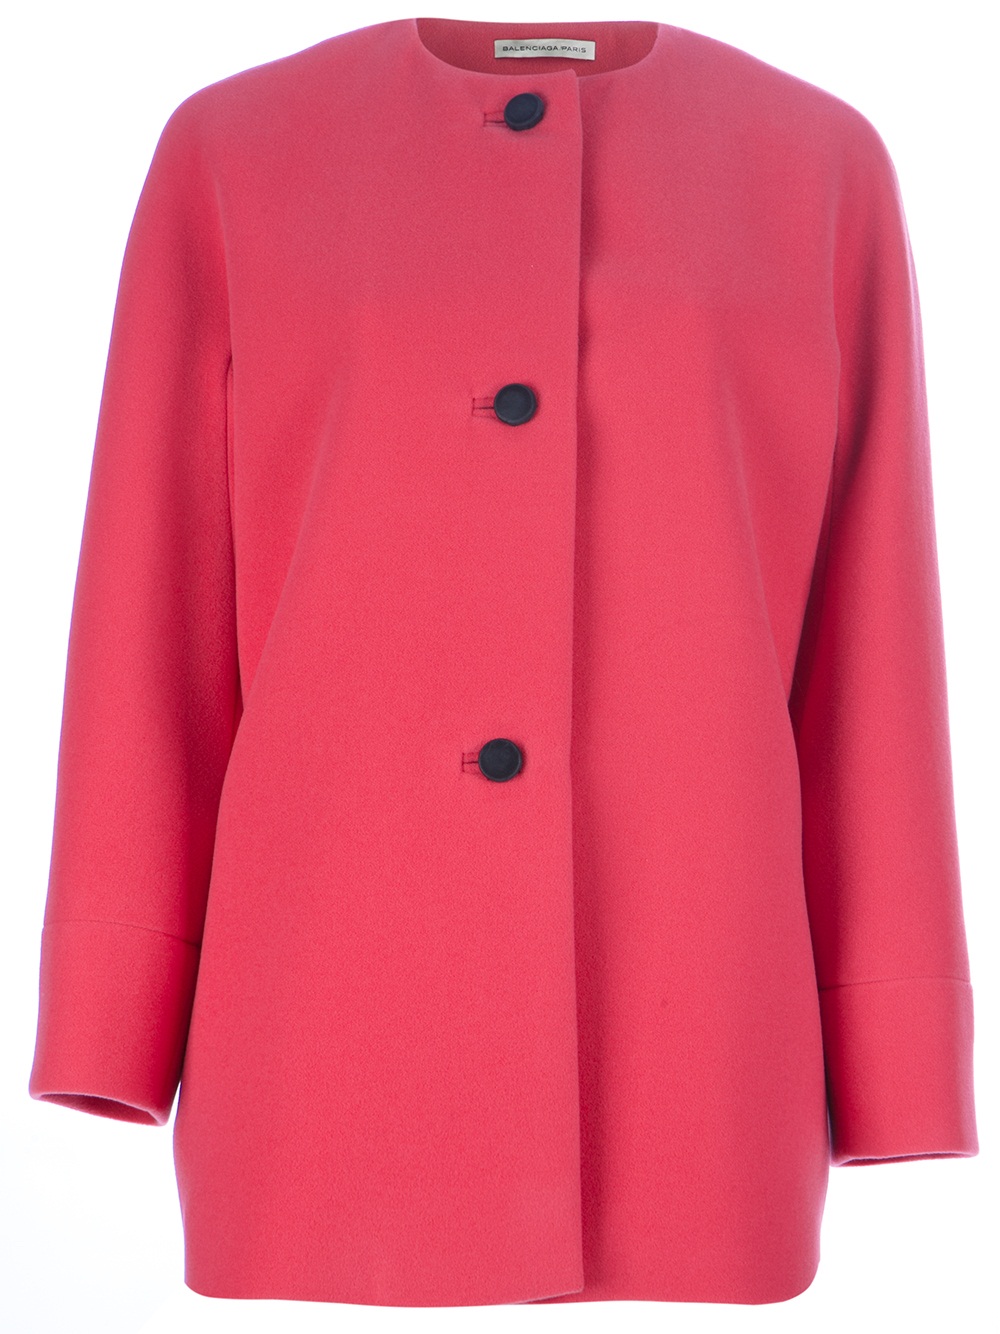 Balenciaga Jewel Neck Buttoned Coat in Pink | Lyst